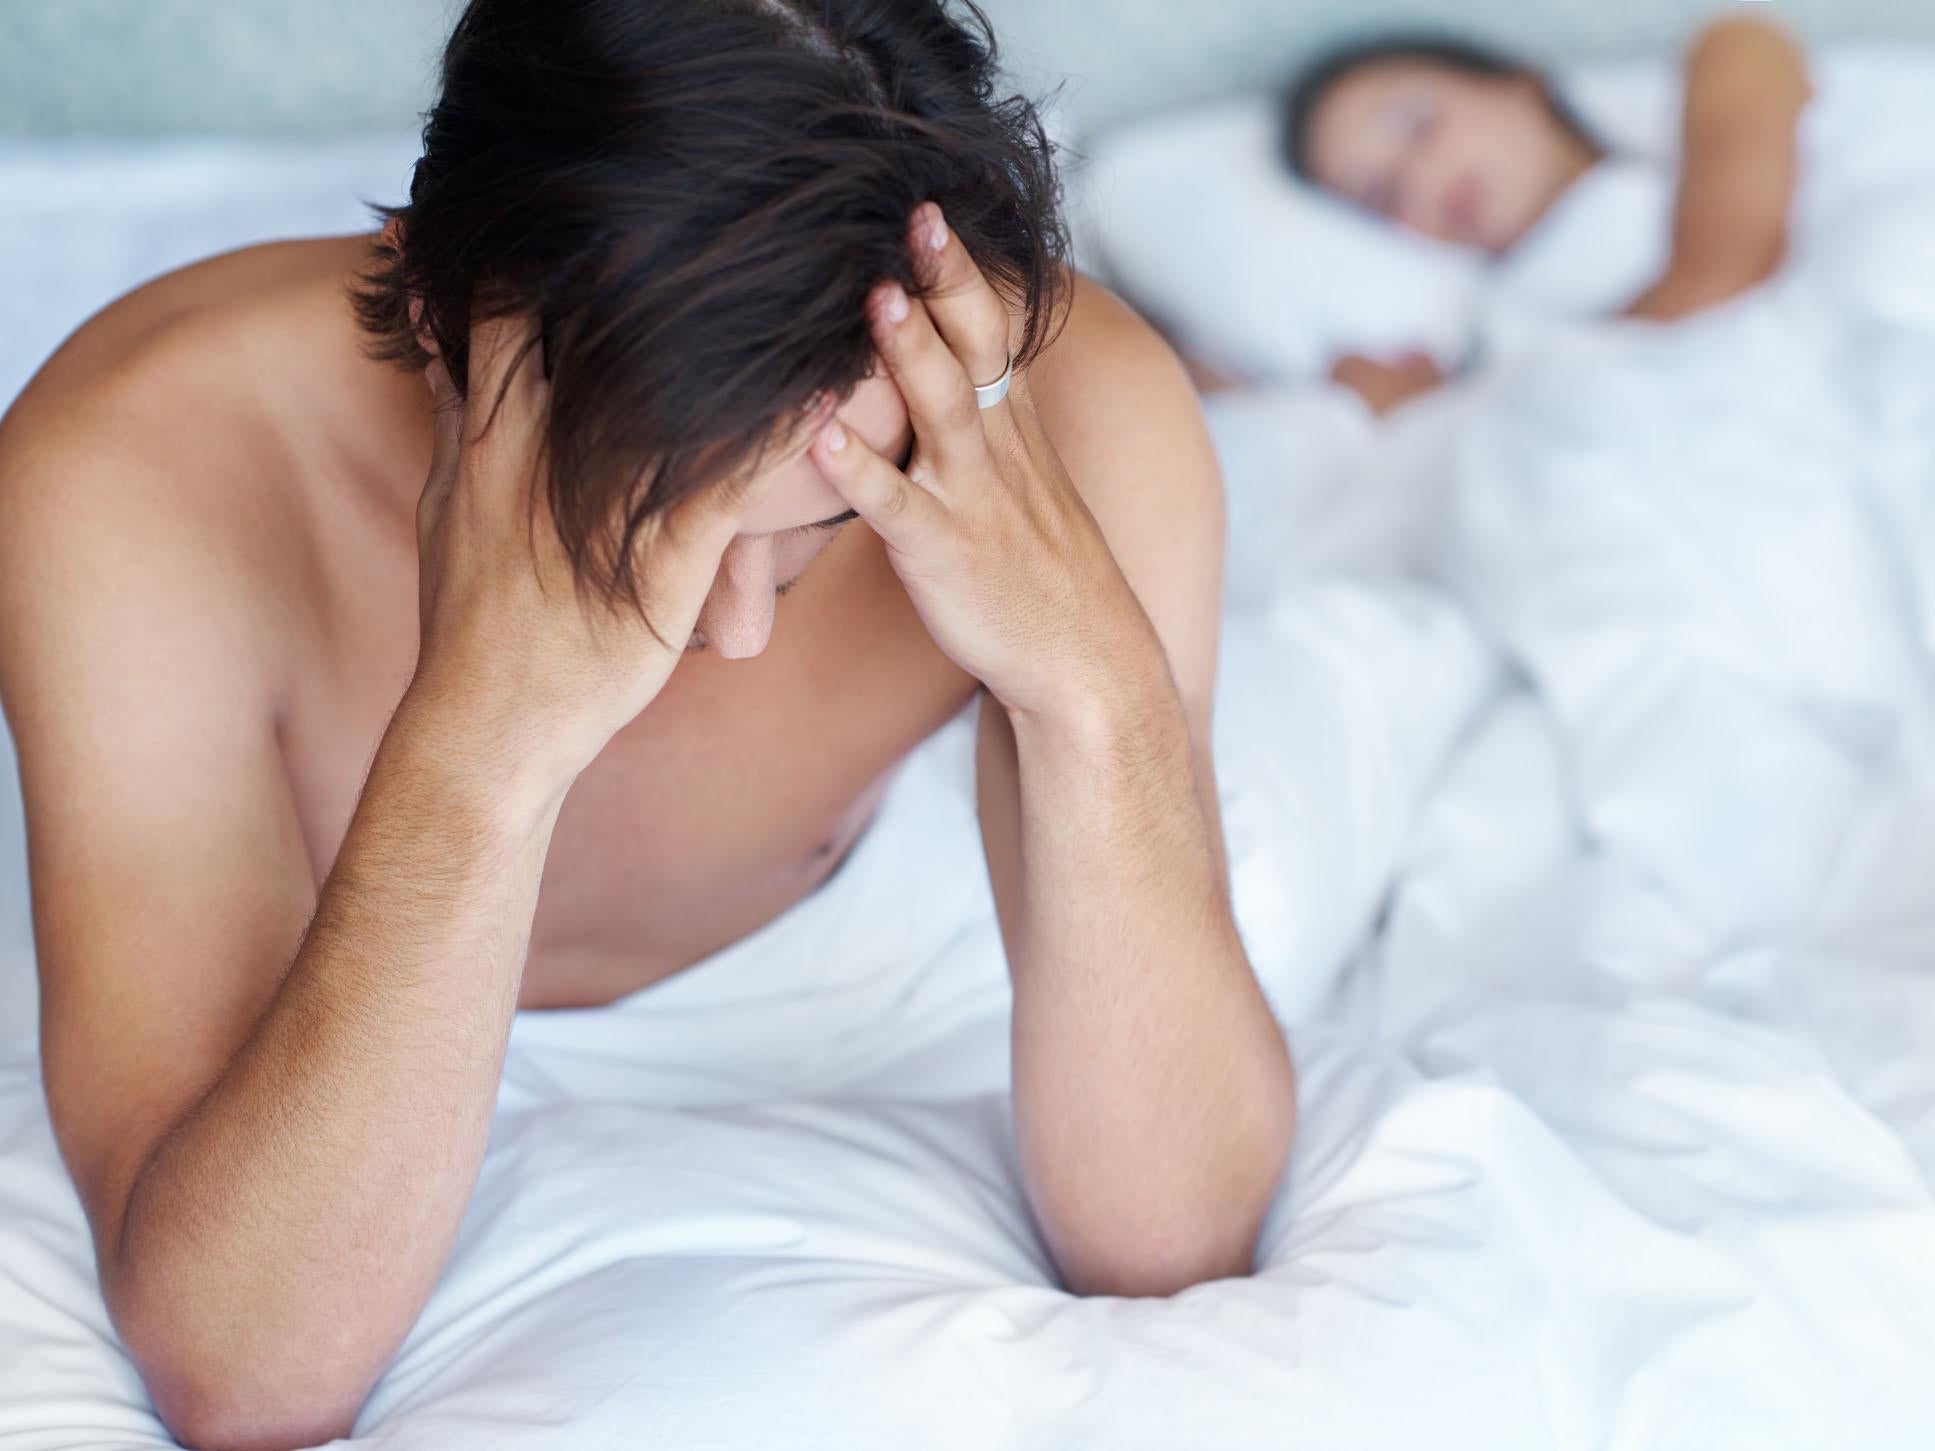 It is estimated 322 million men worldwide will be affected by erectile dysfunction by 2025